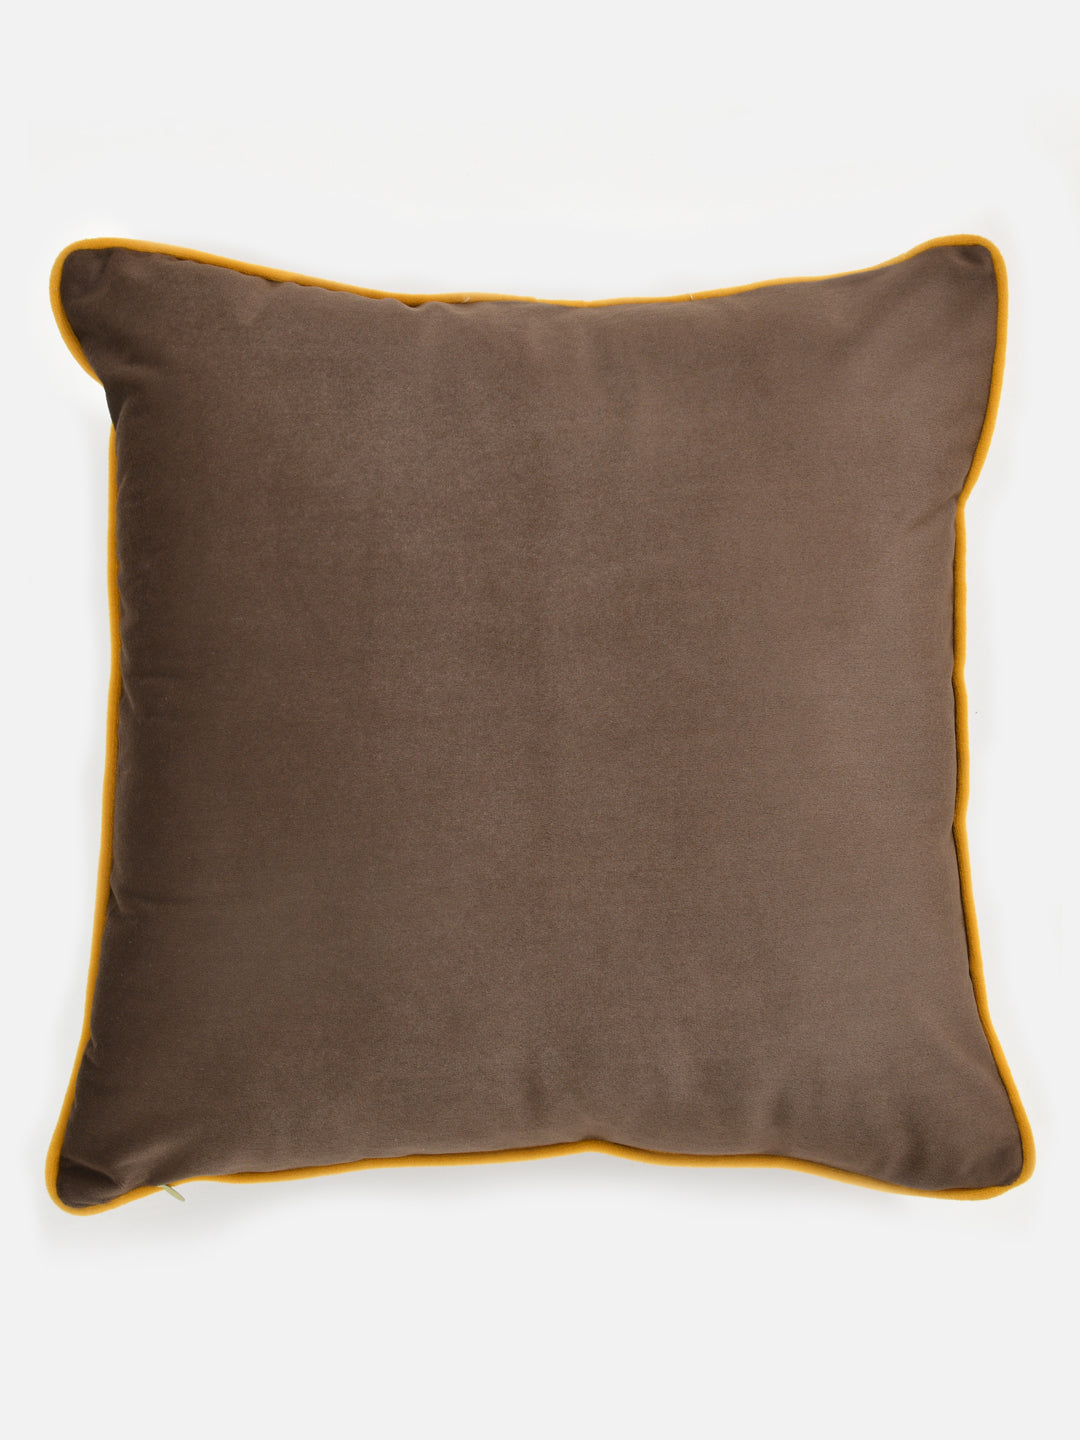 Velvet Cushion Covers; Set of 3; Caramel Brown With Yellow Piping